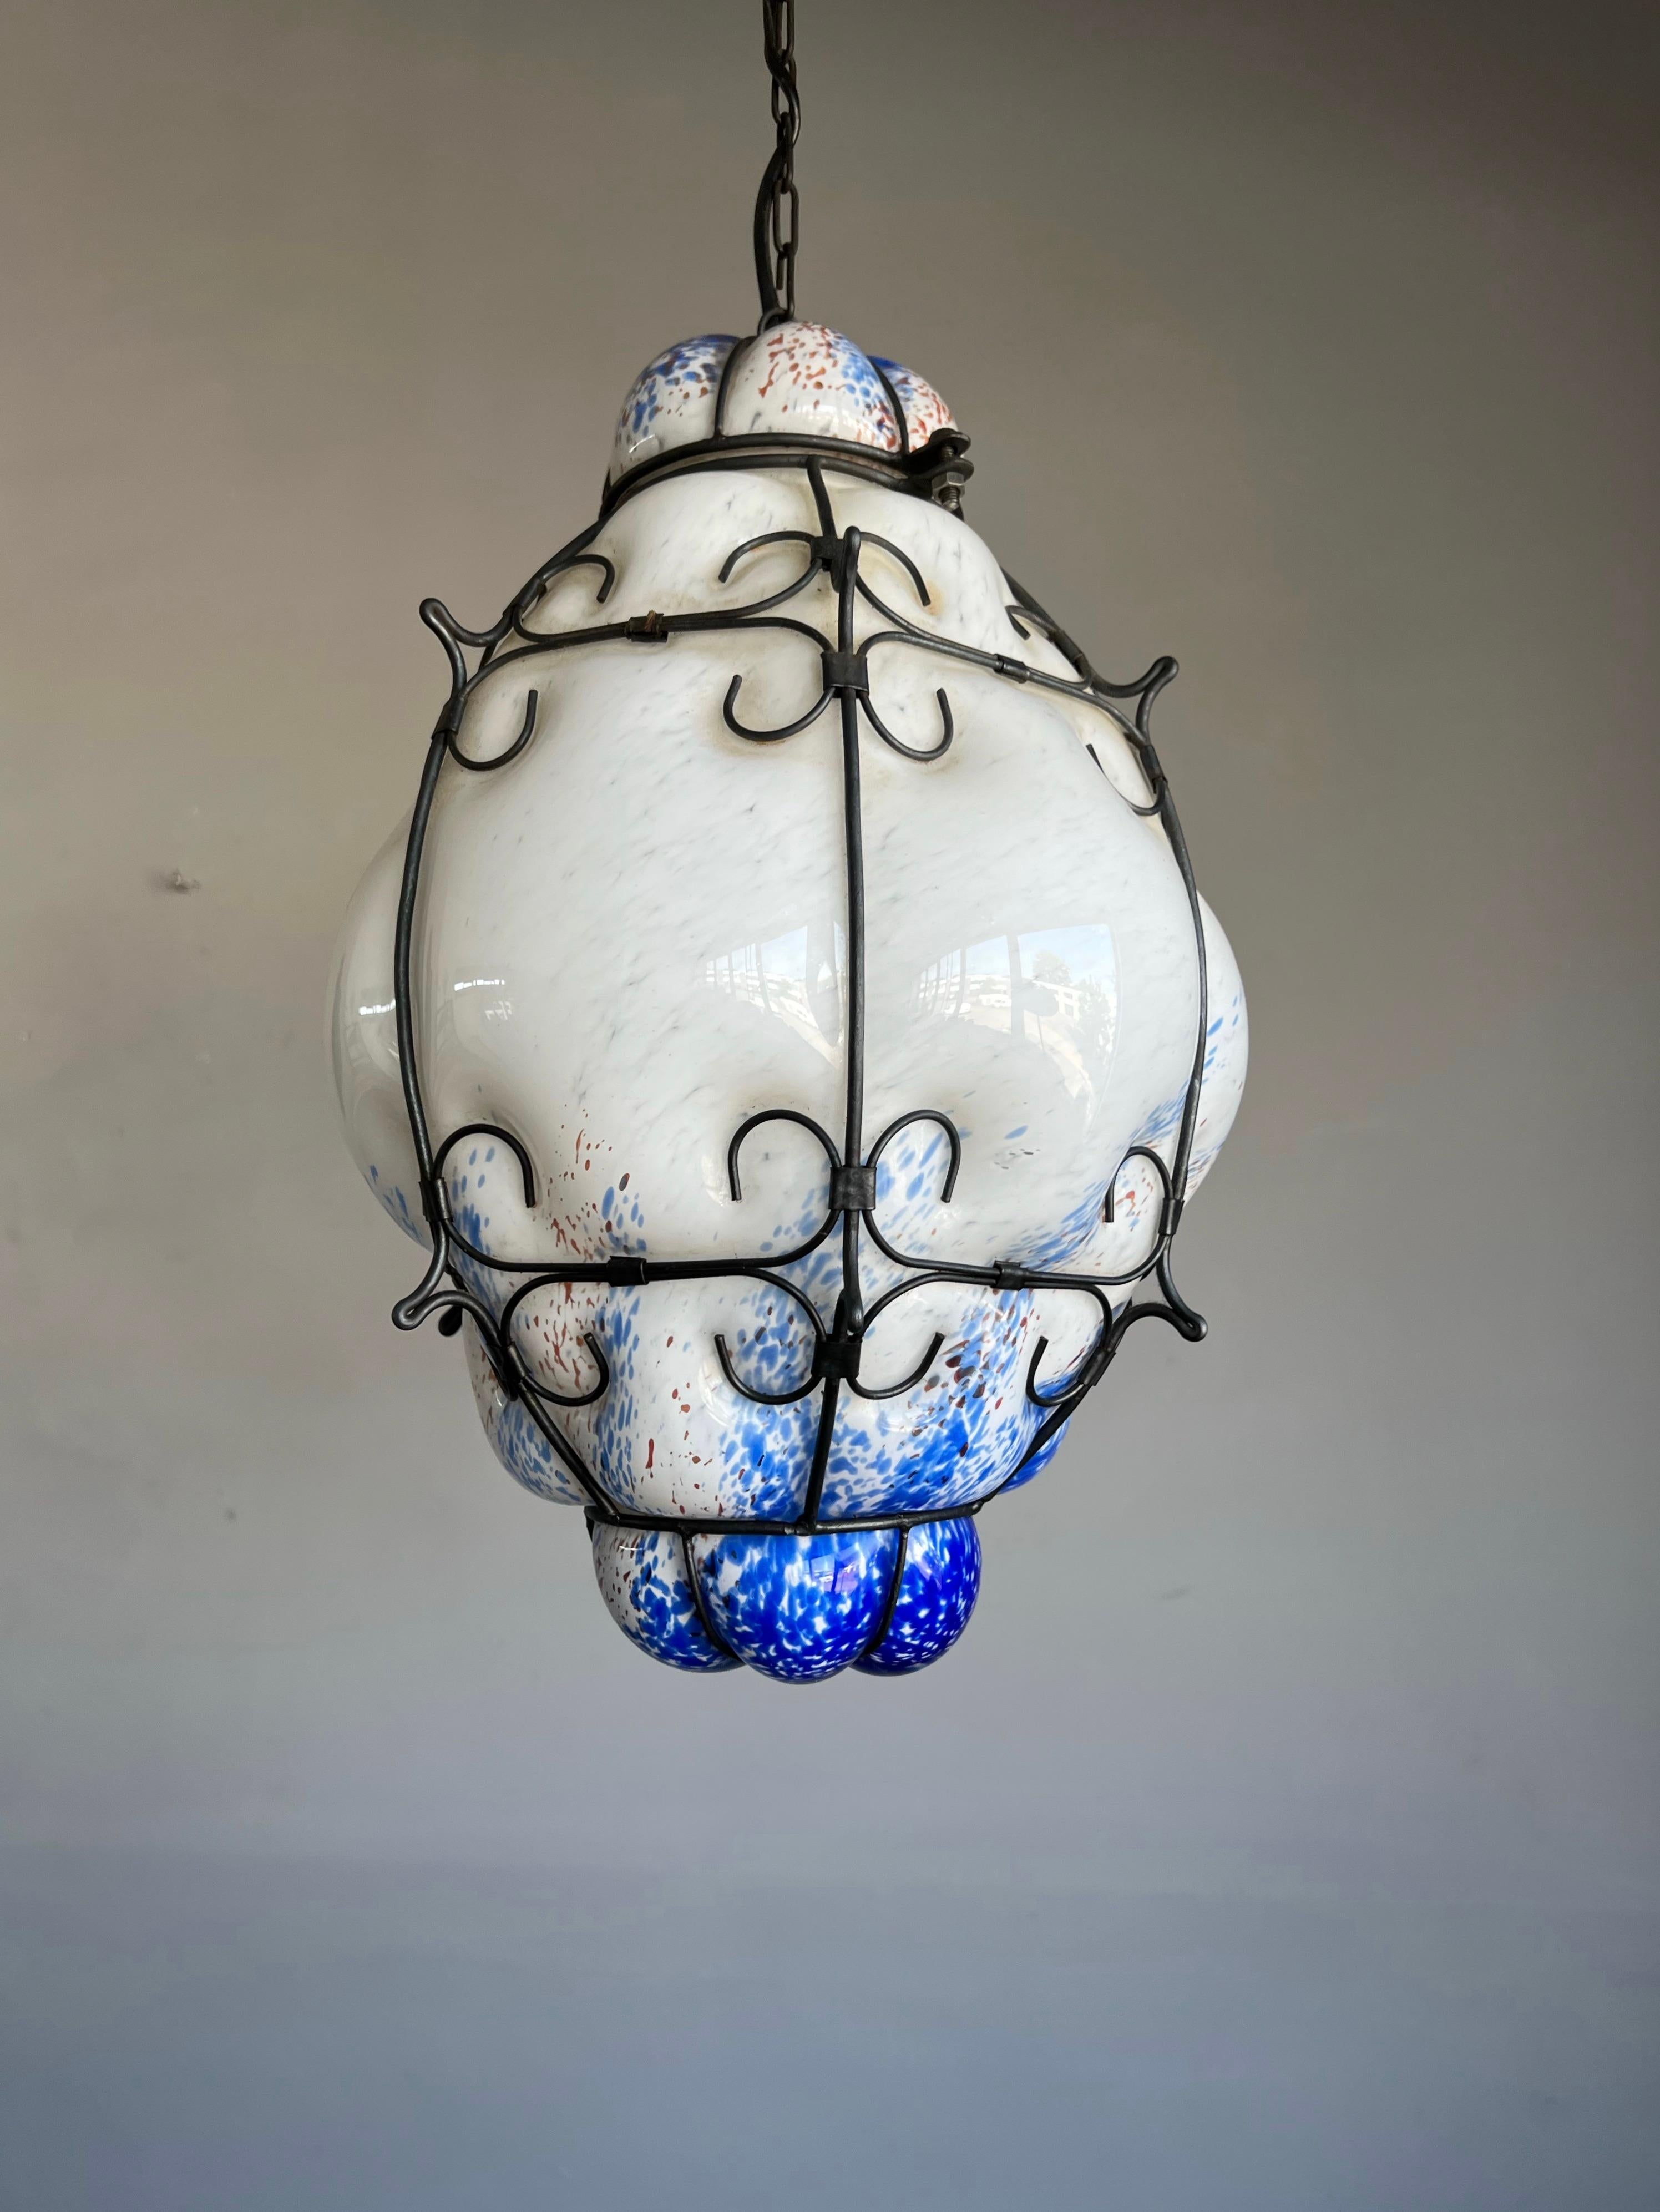 Remarkable white Murano light fixture with earthen red and ocean blue inclusions.

One of the reasons why we think we have the best job in the world is that we keep finding beautiful and all handcrafted antiques that we have never seen before. We